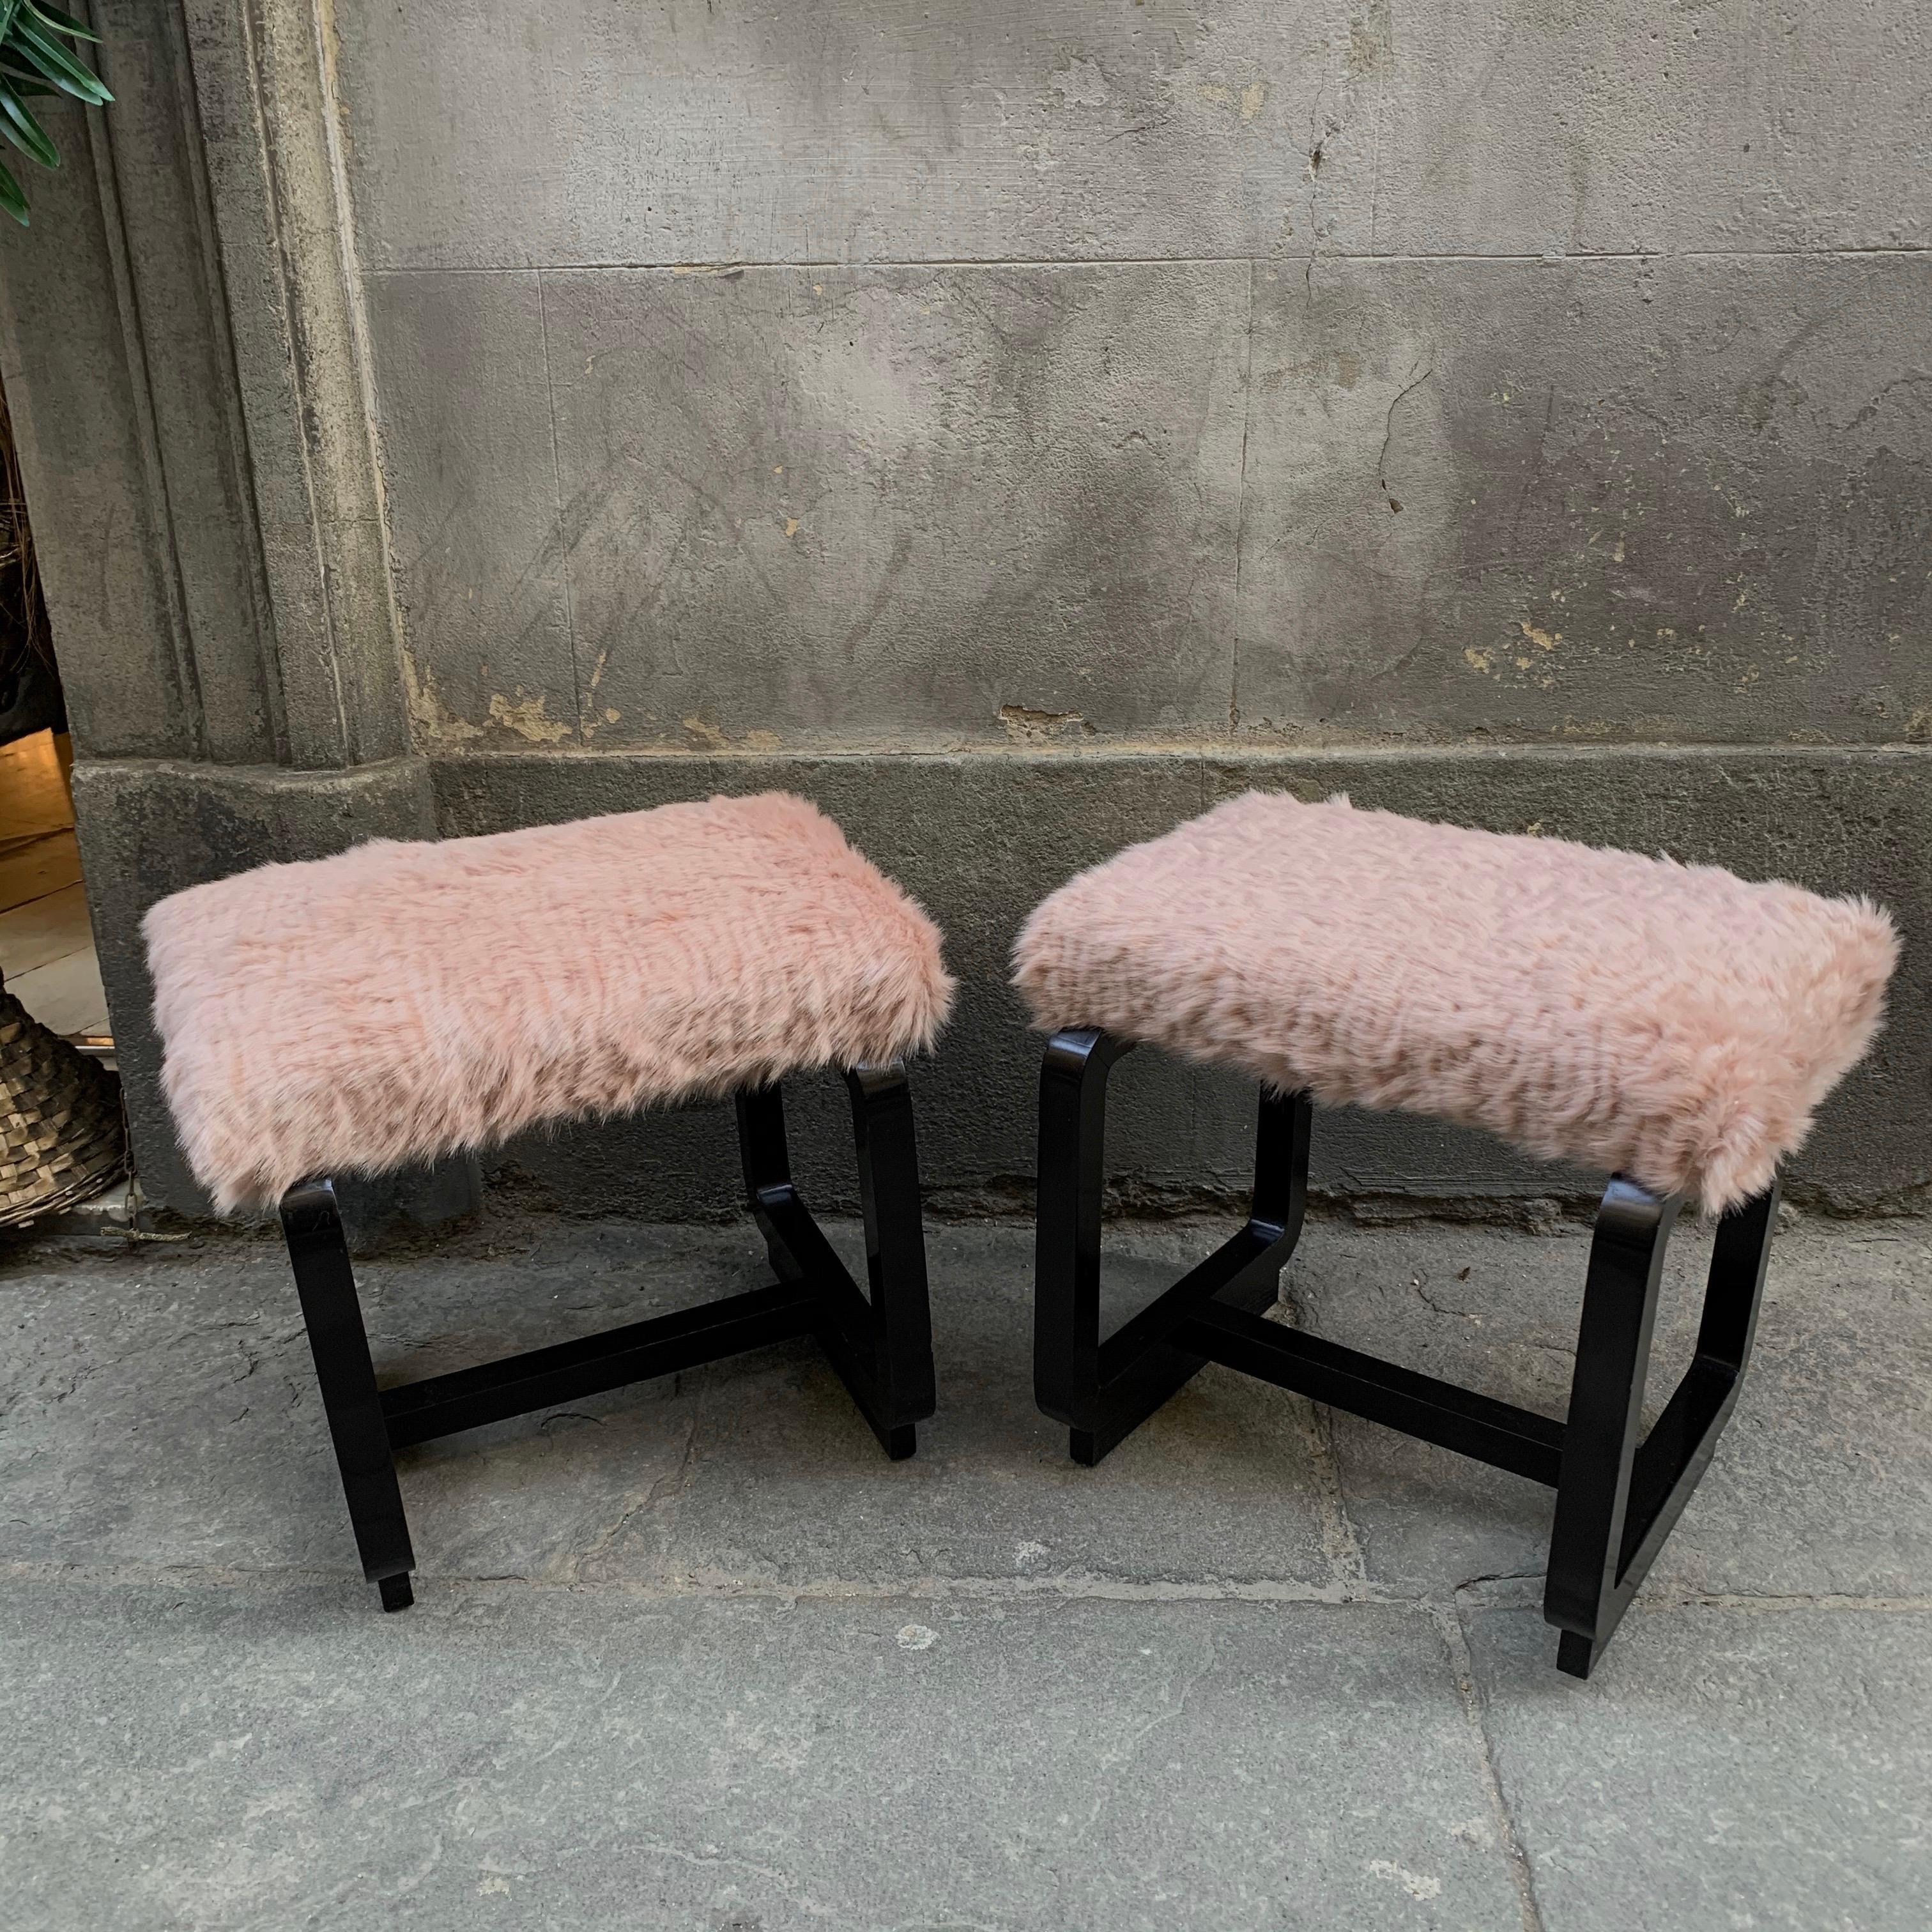 Italian Pair of Deco Benches in Black Lacquered Wood and Pale Pink Eco Fur Seats, 1930